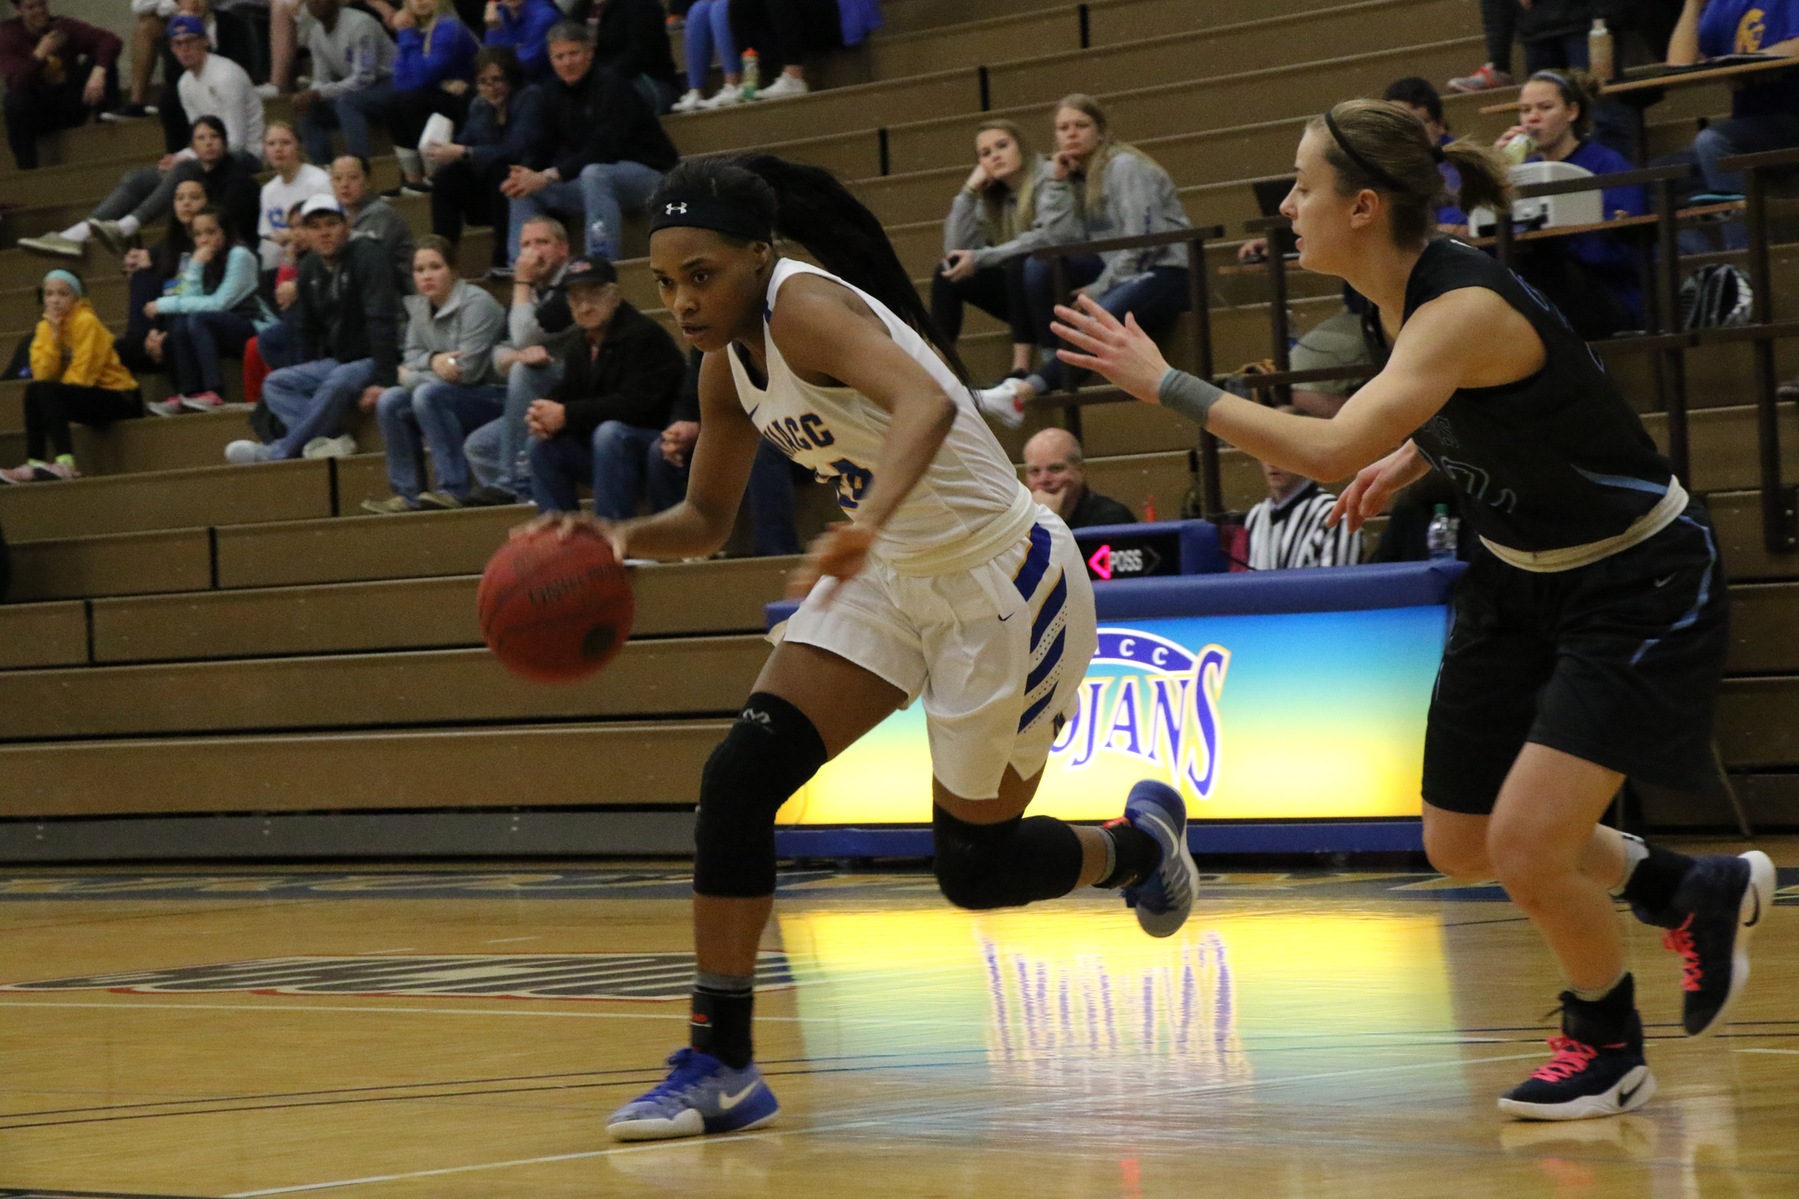 NIACC's Khalilah Holloway drives to the basket in Tuesday's game against Iowa Central.